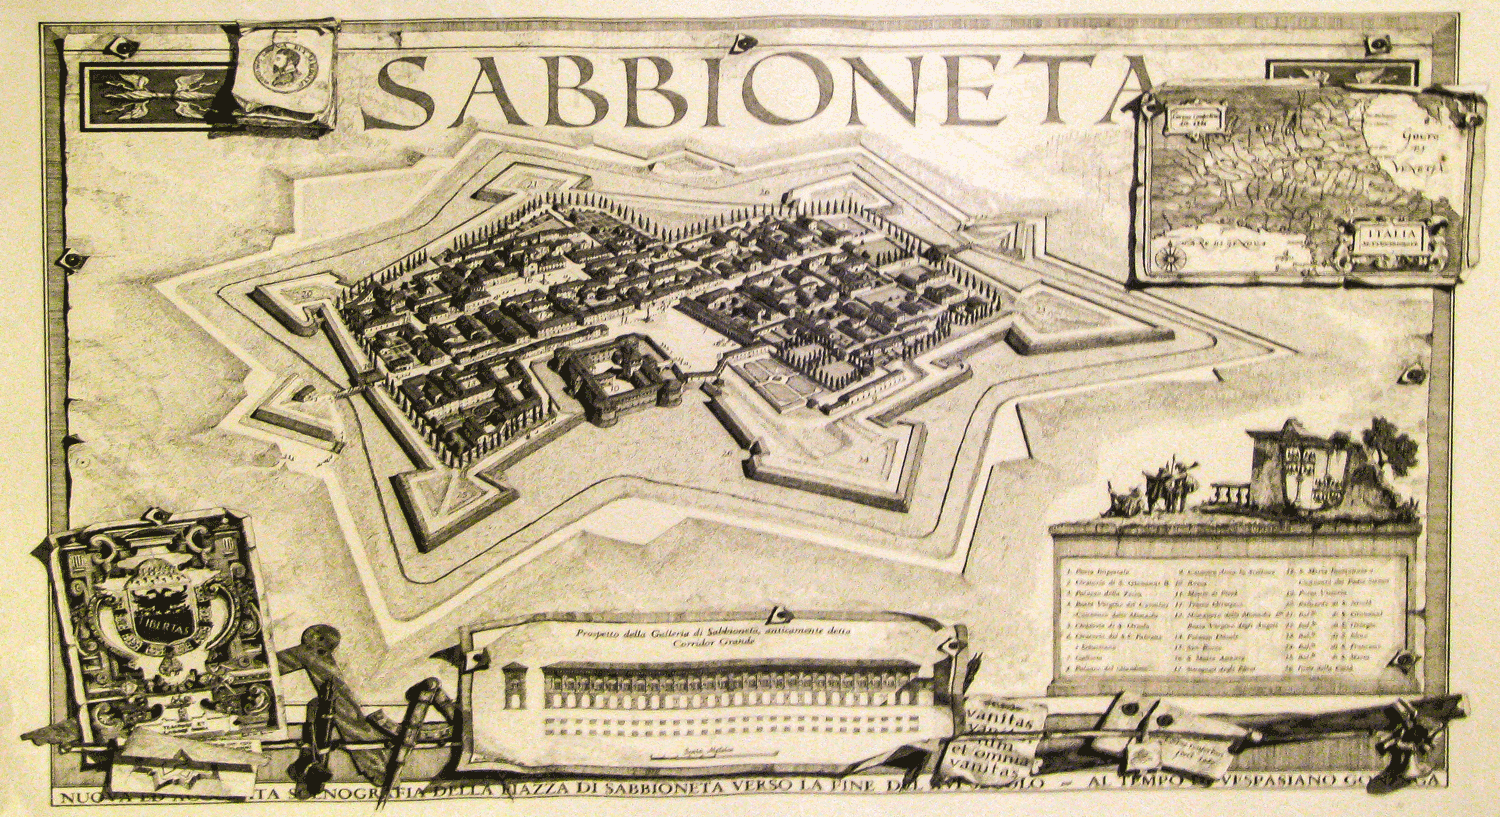 Sabbioneta (IT): New FORTE CULTURA station in Italy